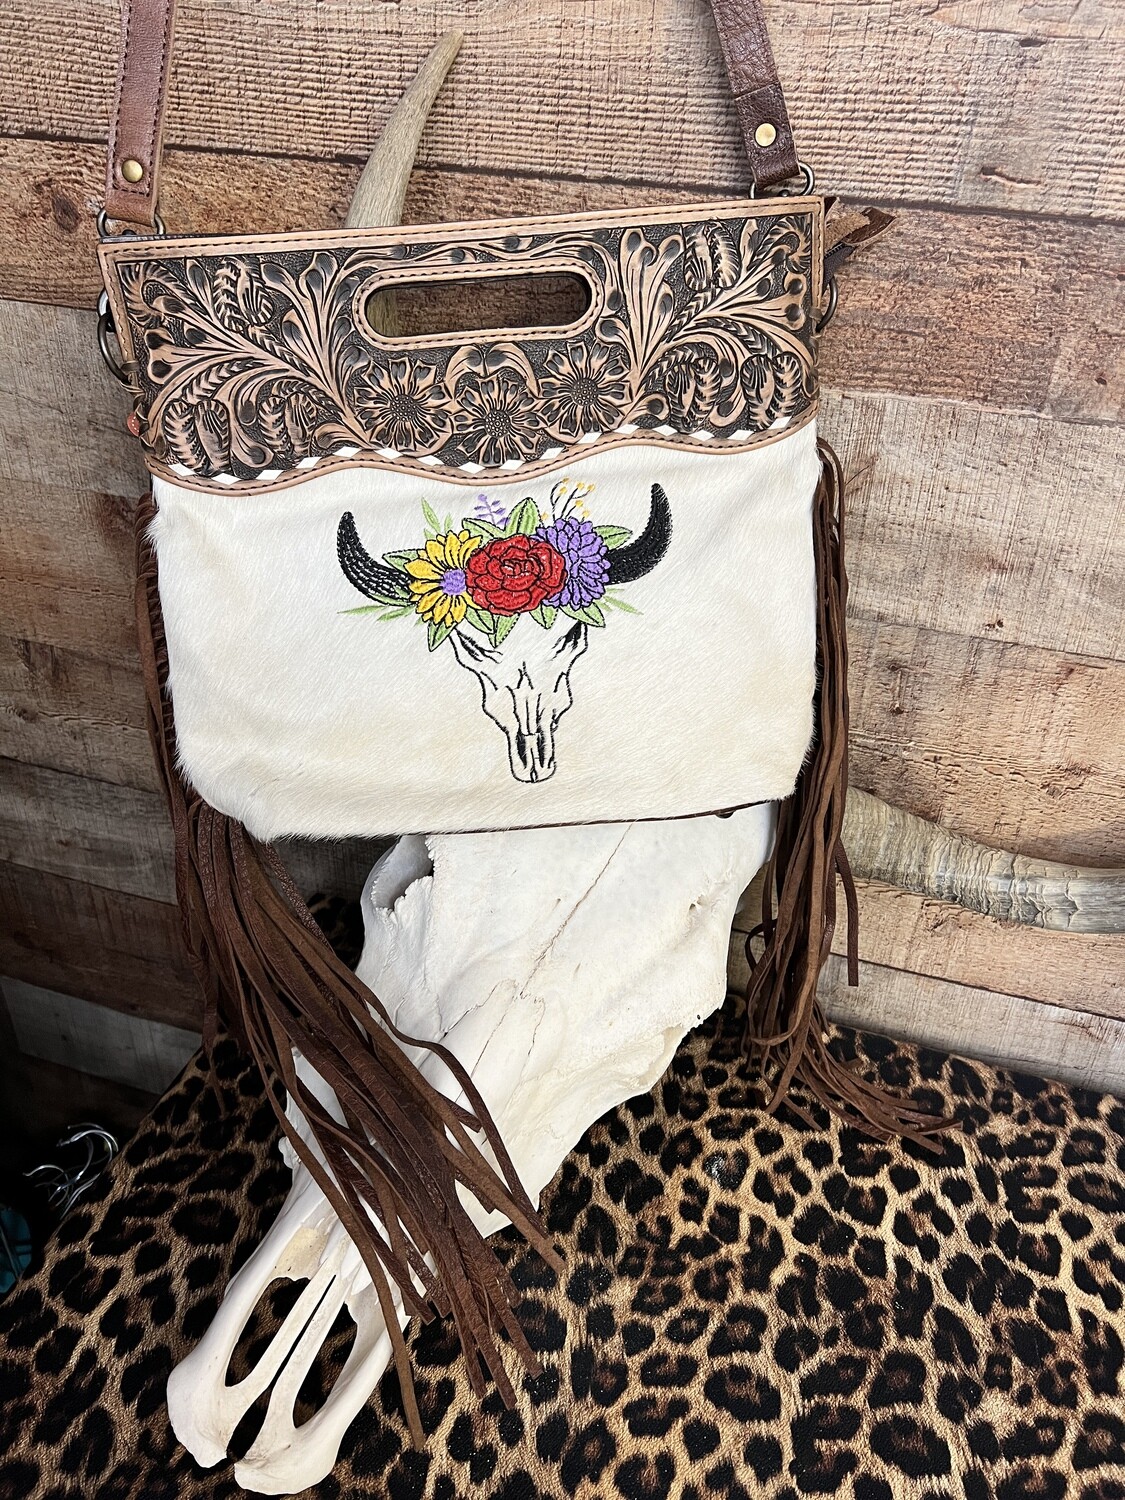 Cowhide Embroidered Skull American Darling Bag with Tooled Leather & Fringe